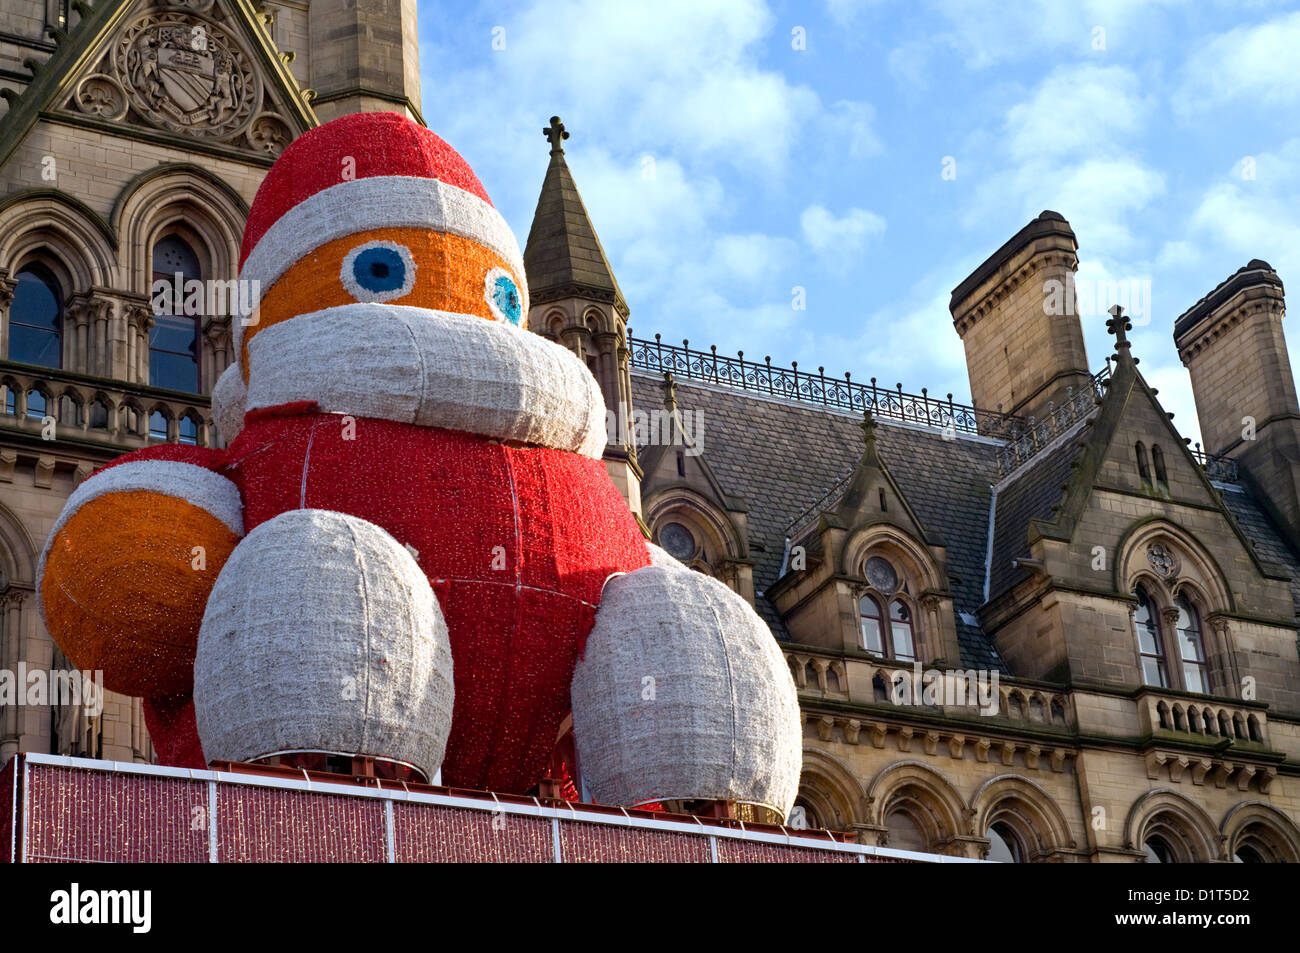 Giant Santa figure outside Manchester town hall in Albert Square, England, UK Stock Photo